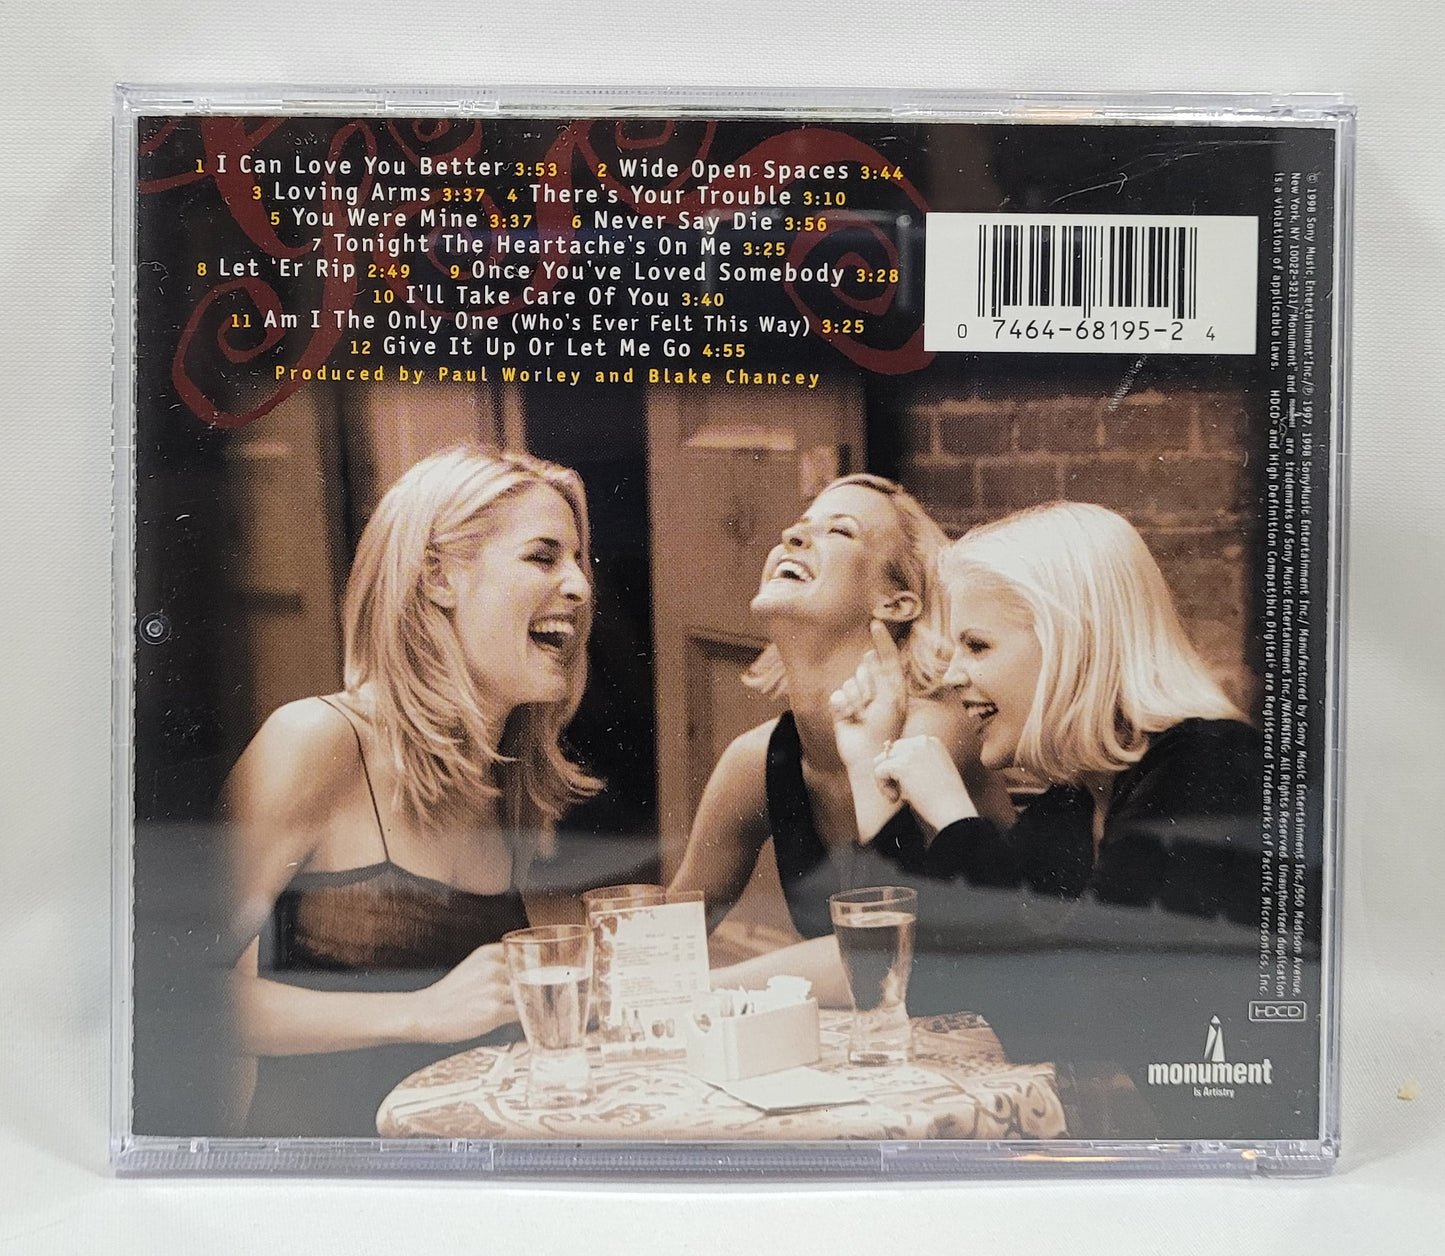 Dixie Chicks - Wide Open Spaces [1998 Used HDCD] [B]